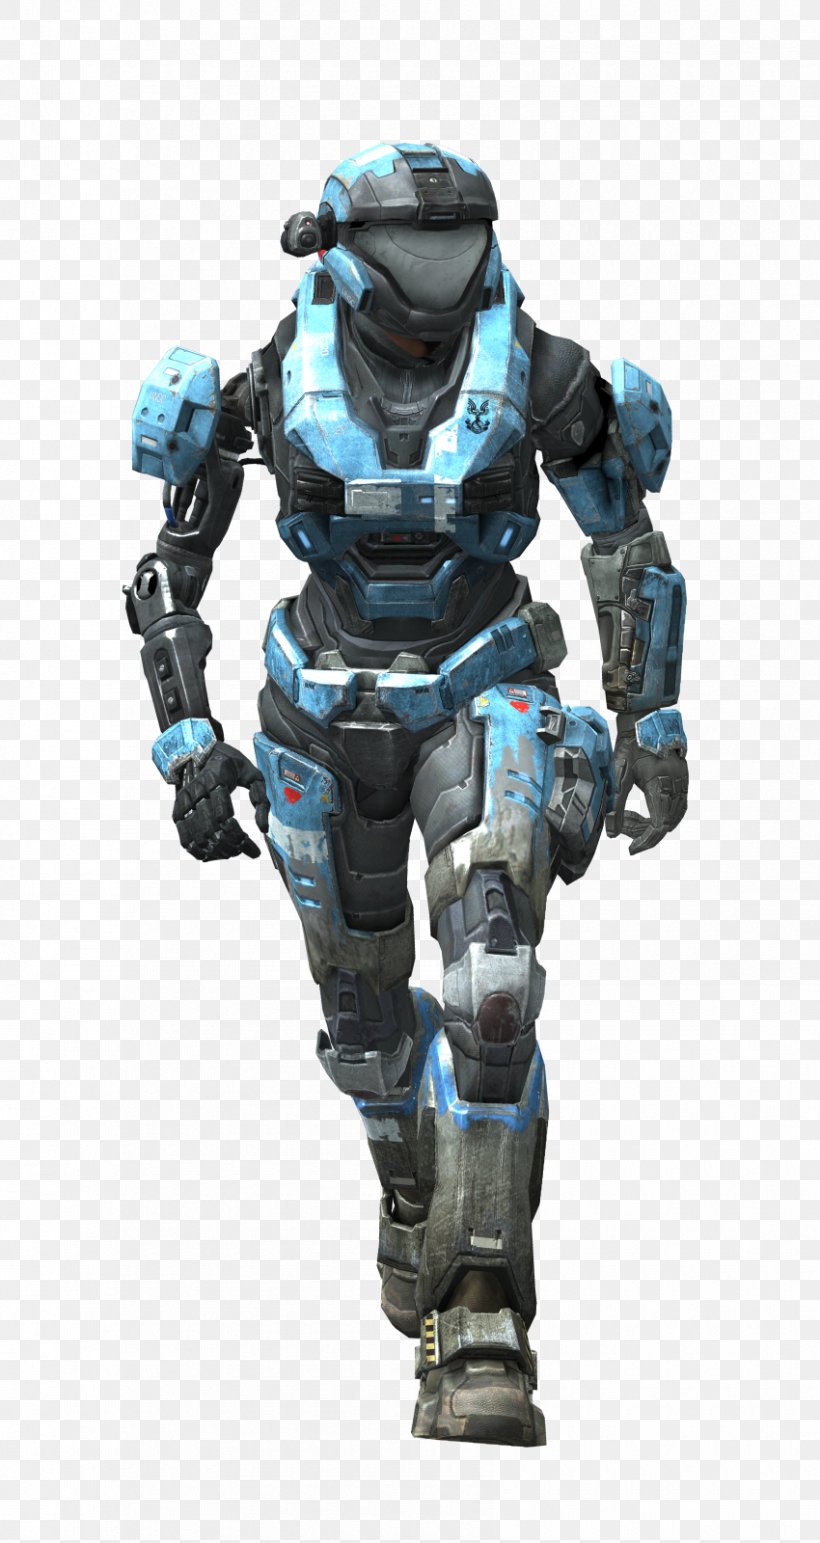 Halo: Reach Halo 3: ODST Halo: Spartan Assault Halo 5: Guardians Halo 4, PNG, 850x1600px, Halo Reach, Action Figure, Armour, Bungie, Cortana Download Free